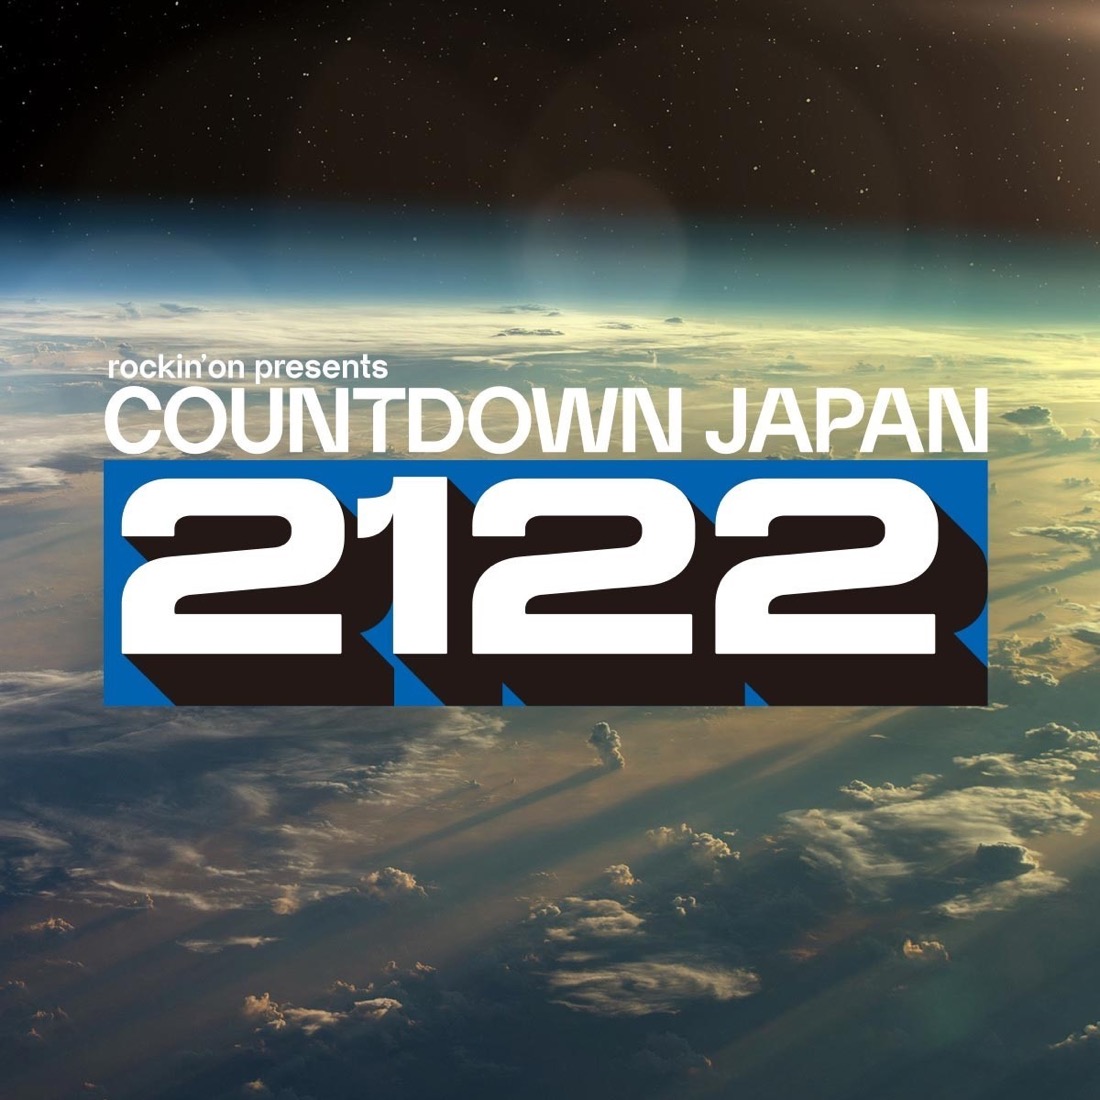 『COUNTDOWN JAPAN』、32組の全出演アーティスト発表 - 画像一覧（2/2）